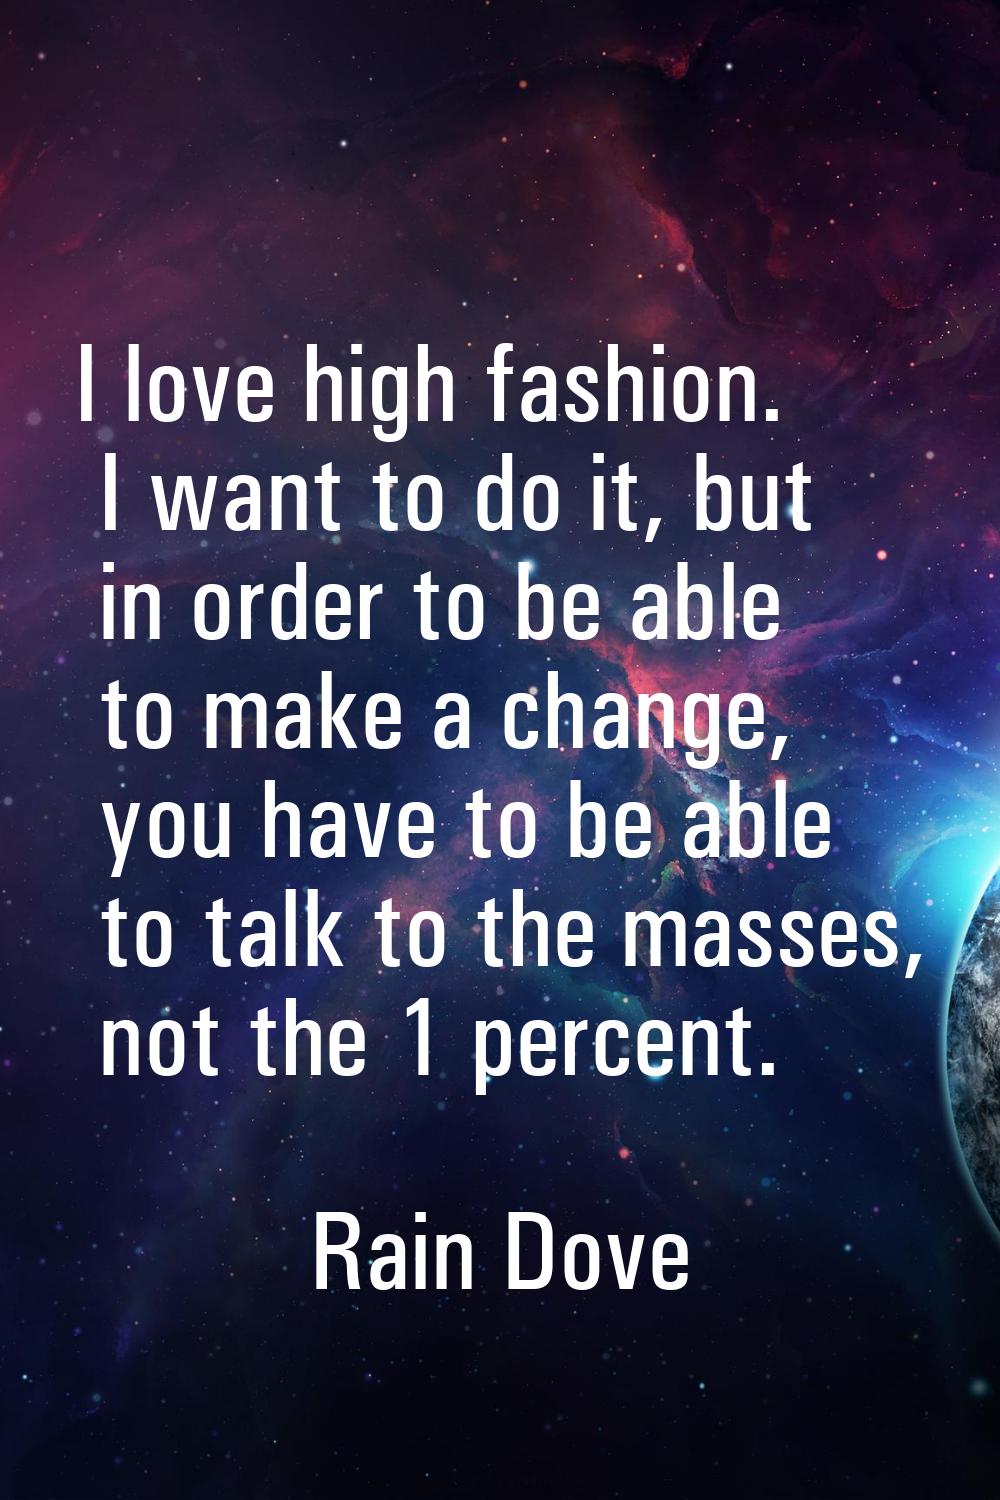 I love high fashion. I want to do it, but in order to be able to make a change, you have to be able